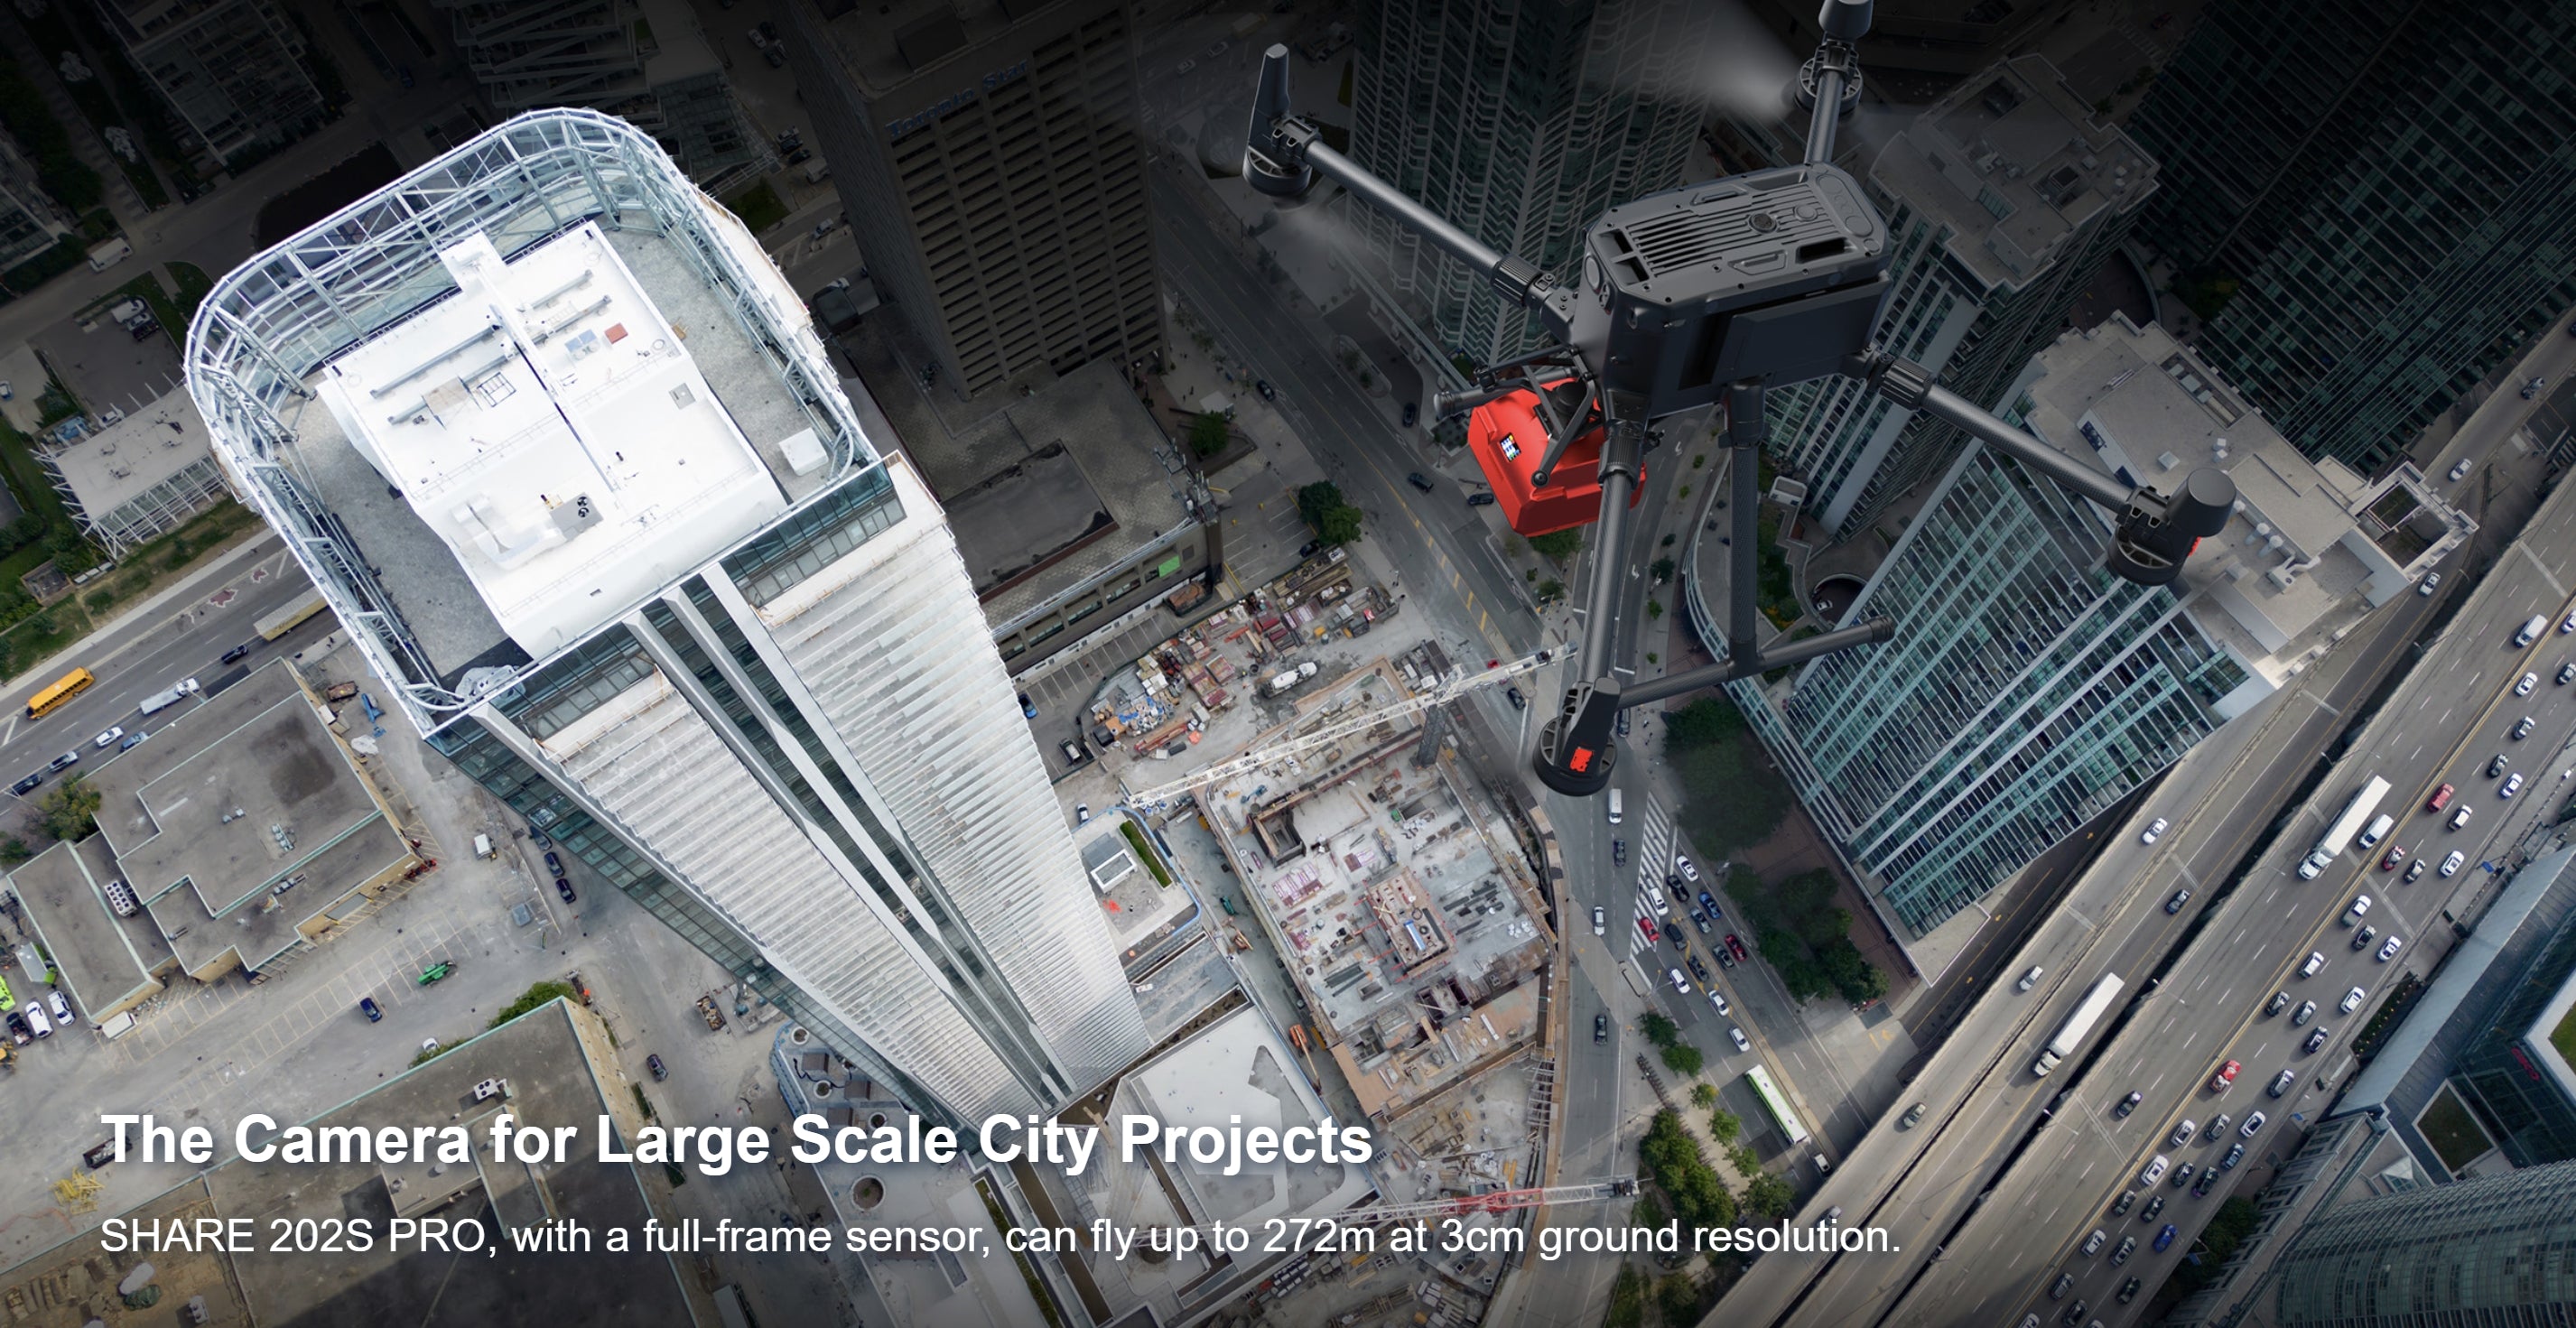 SHARE 202S Pro V2, Captures city projects at distance, with high-resolution camera and 3 cm/pixel ground resolution.